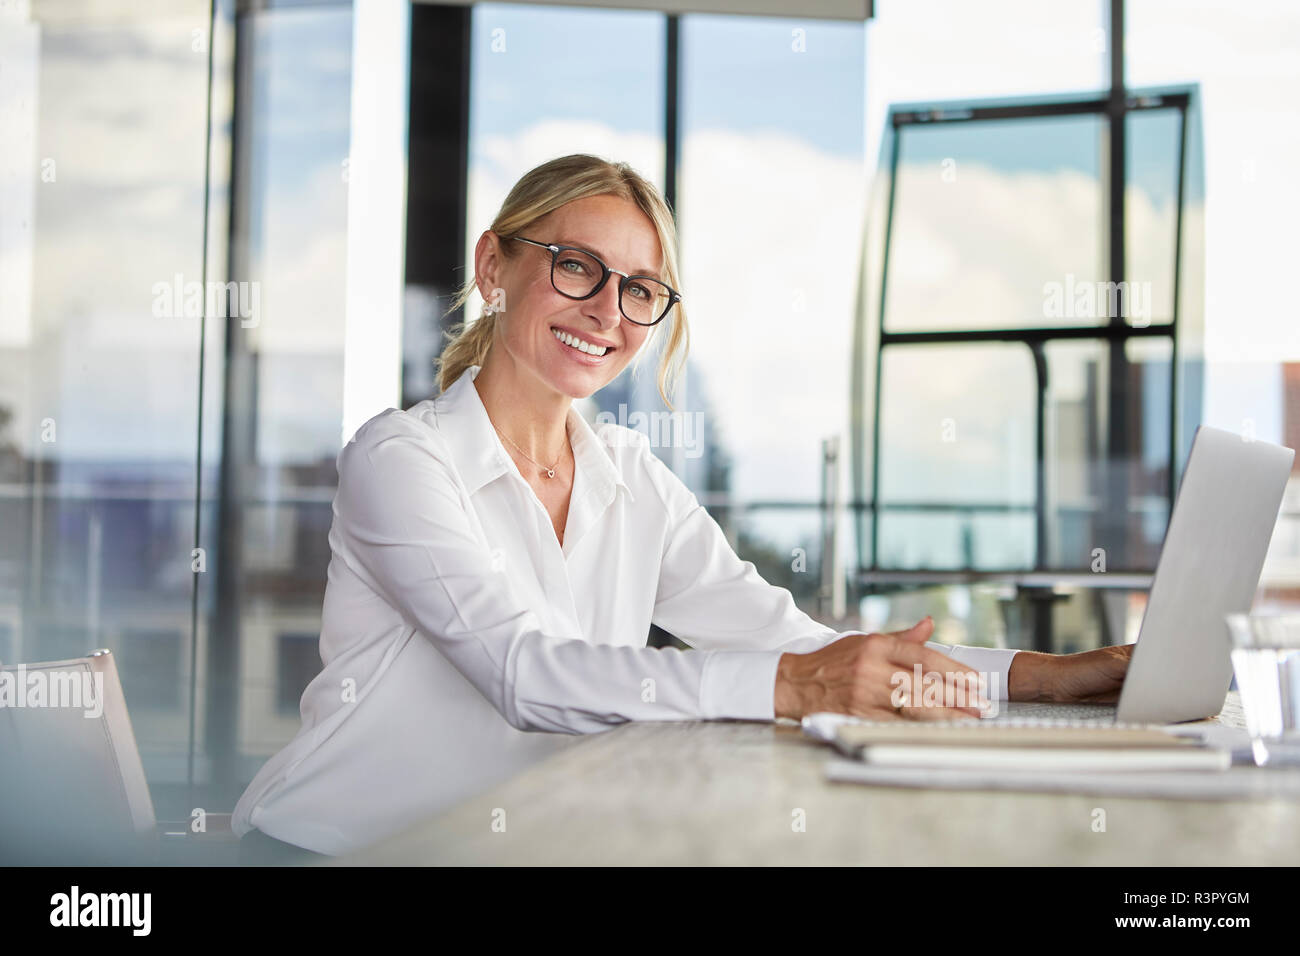 Businesswoman sitting at desk, using laptop, smiling friendly Stock Photo